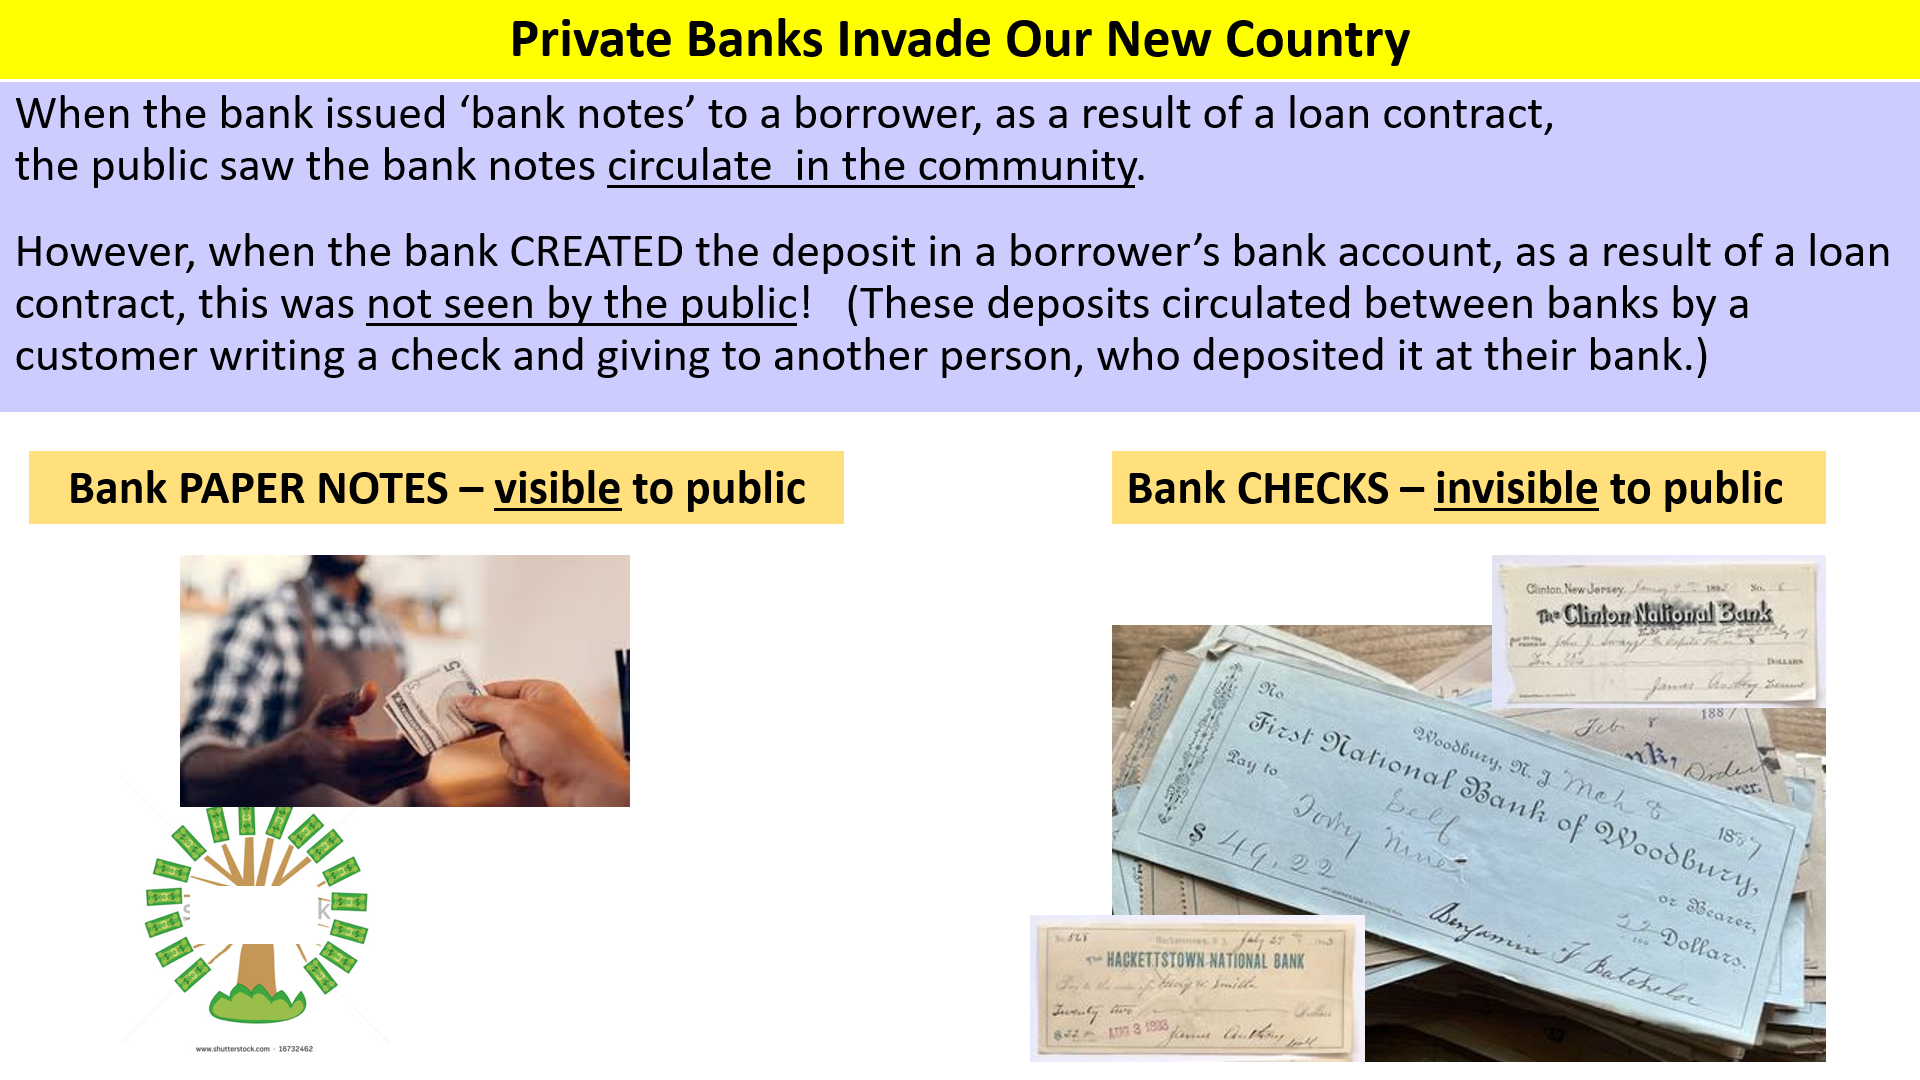 bank money-creation was hidden by use of checks